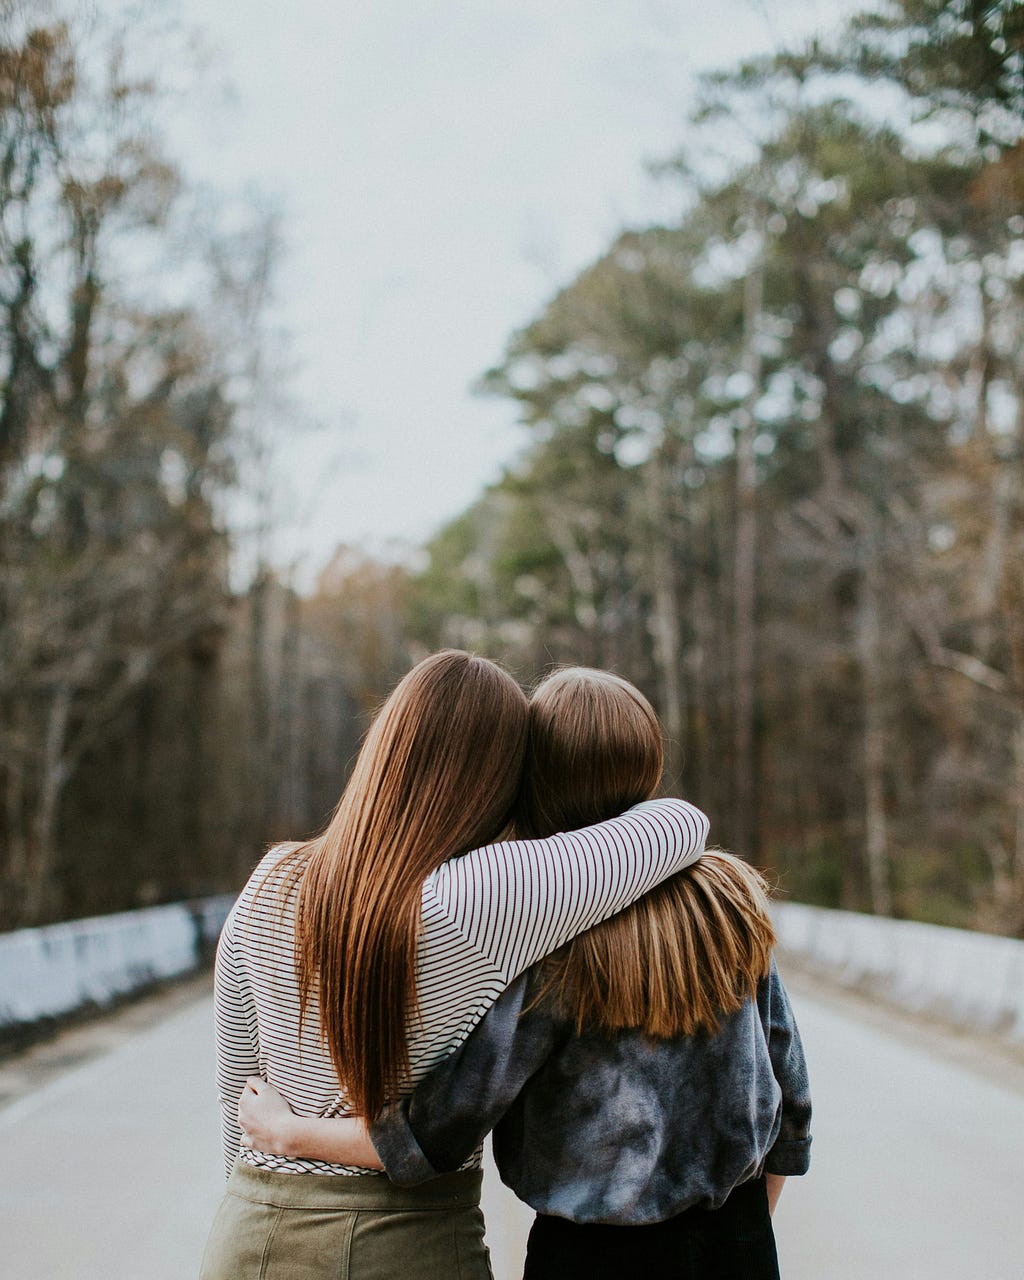 Two female friends, one with her arm around the other